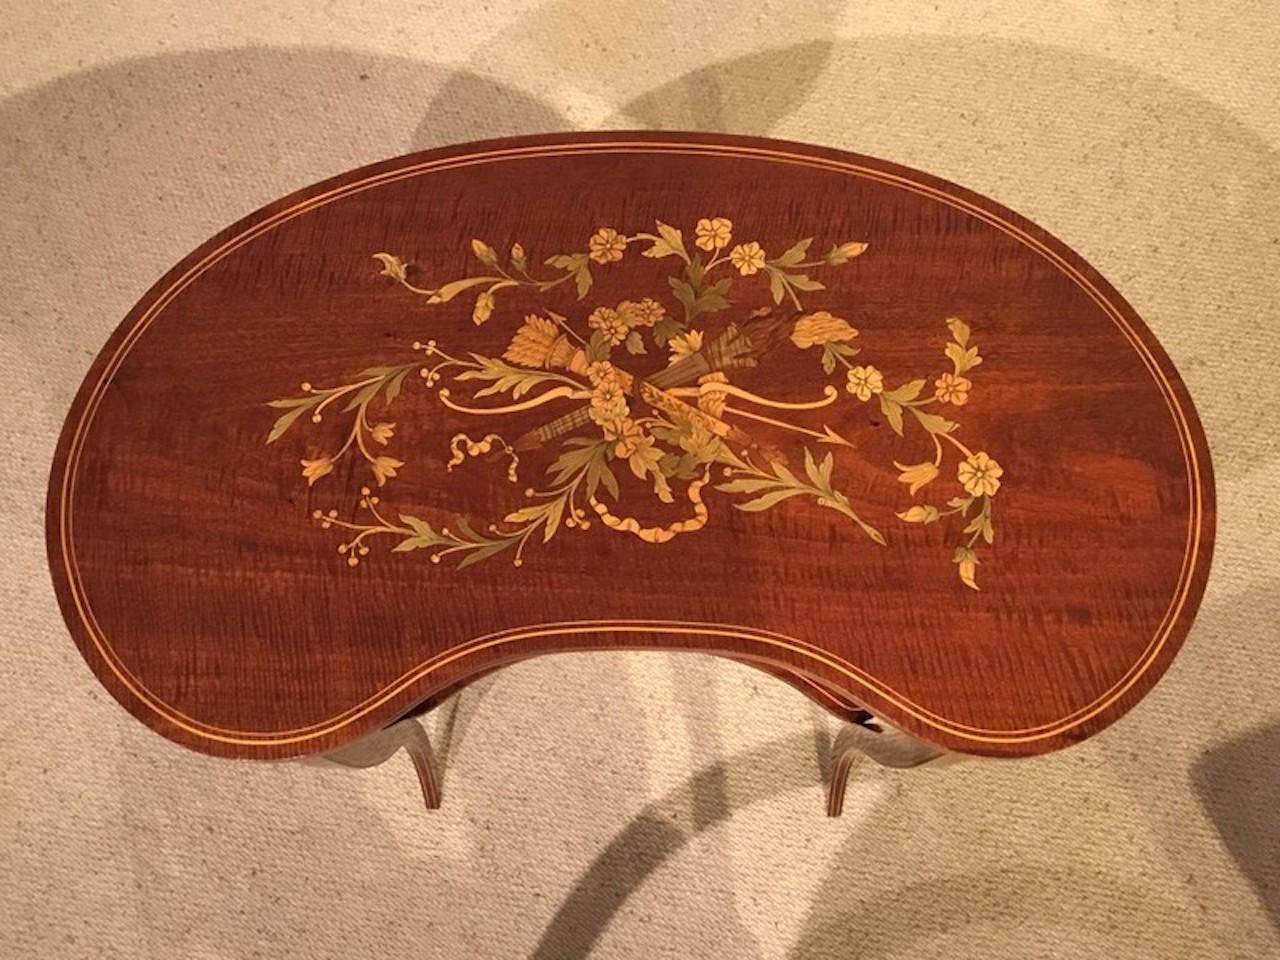 A beautiful mahogany and marquetry inlaid Edwardian Period kidney shaped occasional table. The kidney shaped fiddleback mahogany top with a wonderful marquetry inlaid panel and a variety of exotic wood and veneers. Standing on shaped supports united